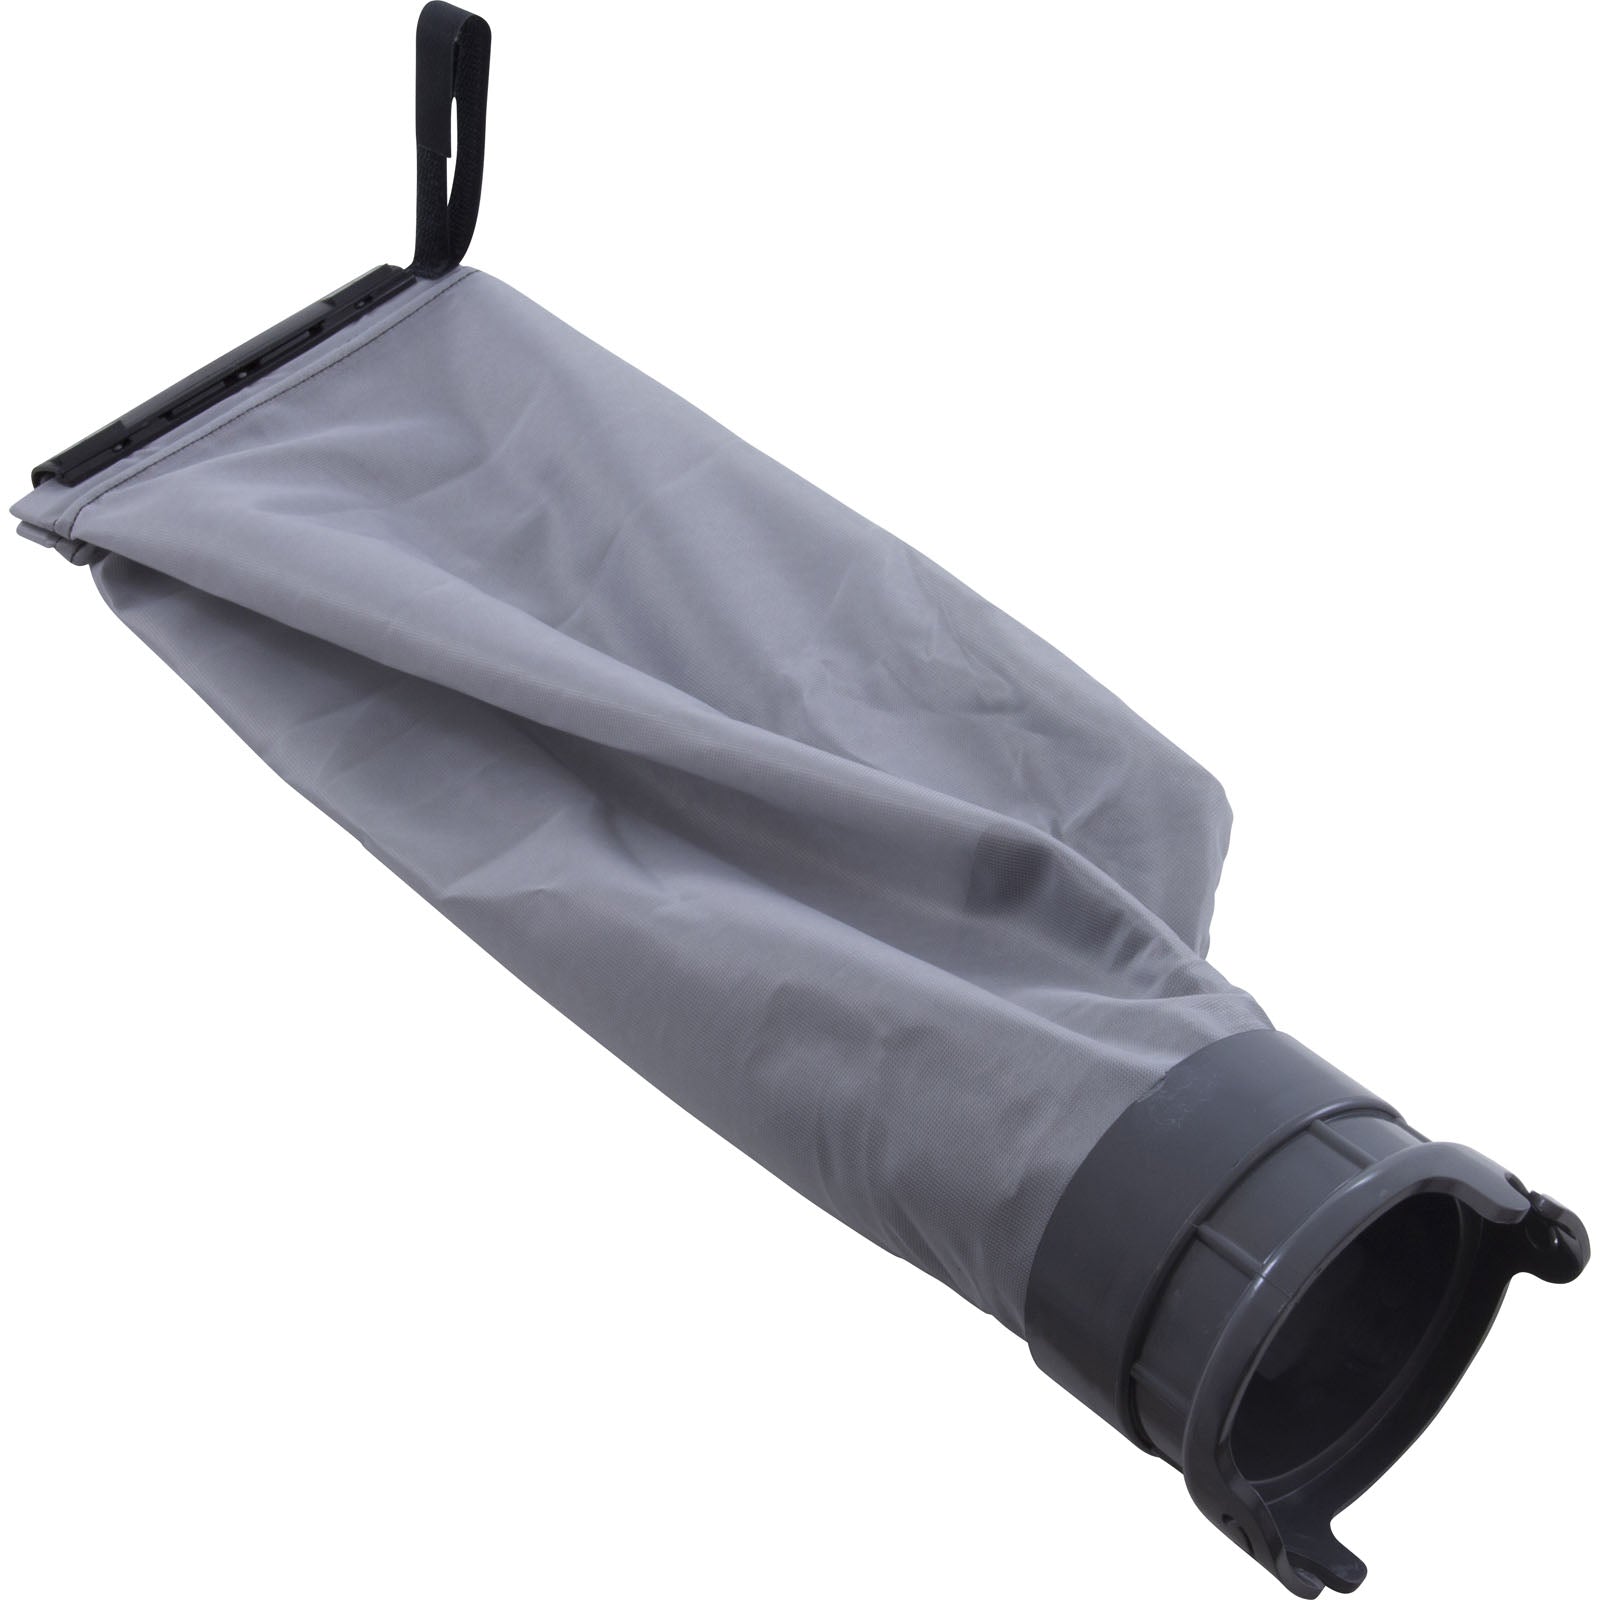 Leaf Bag, Pentair Letro Legend Cleaners, with Snaplock, Gray- 360009